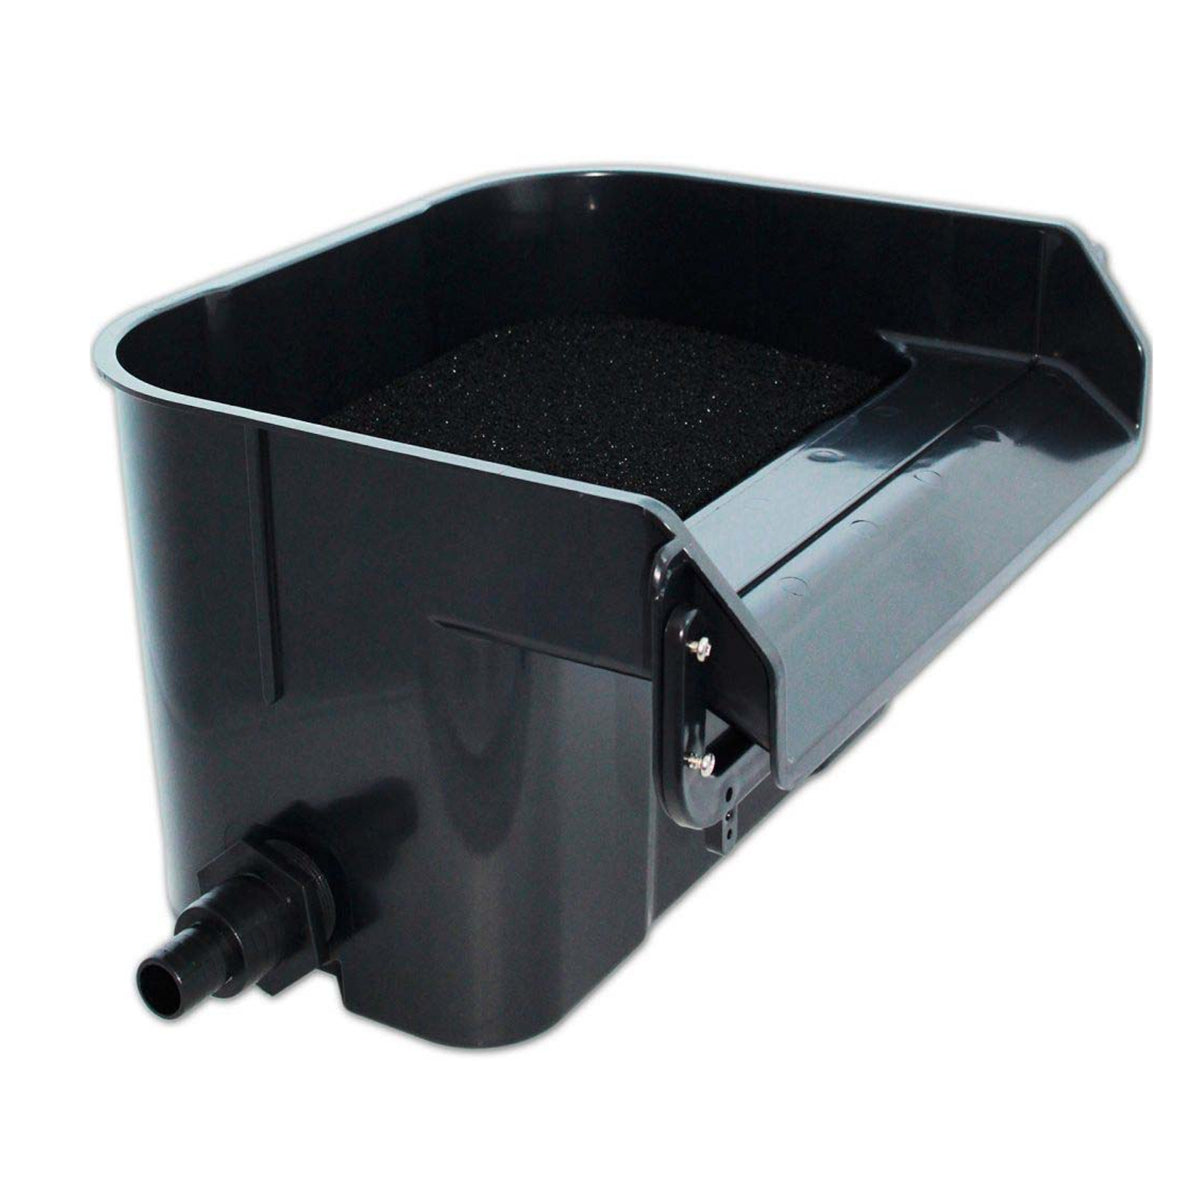 Superfish Pond Feature 2in1 Waterfall & Filter 44cm